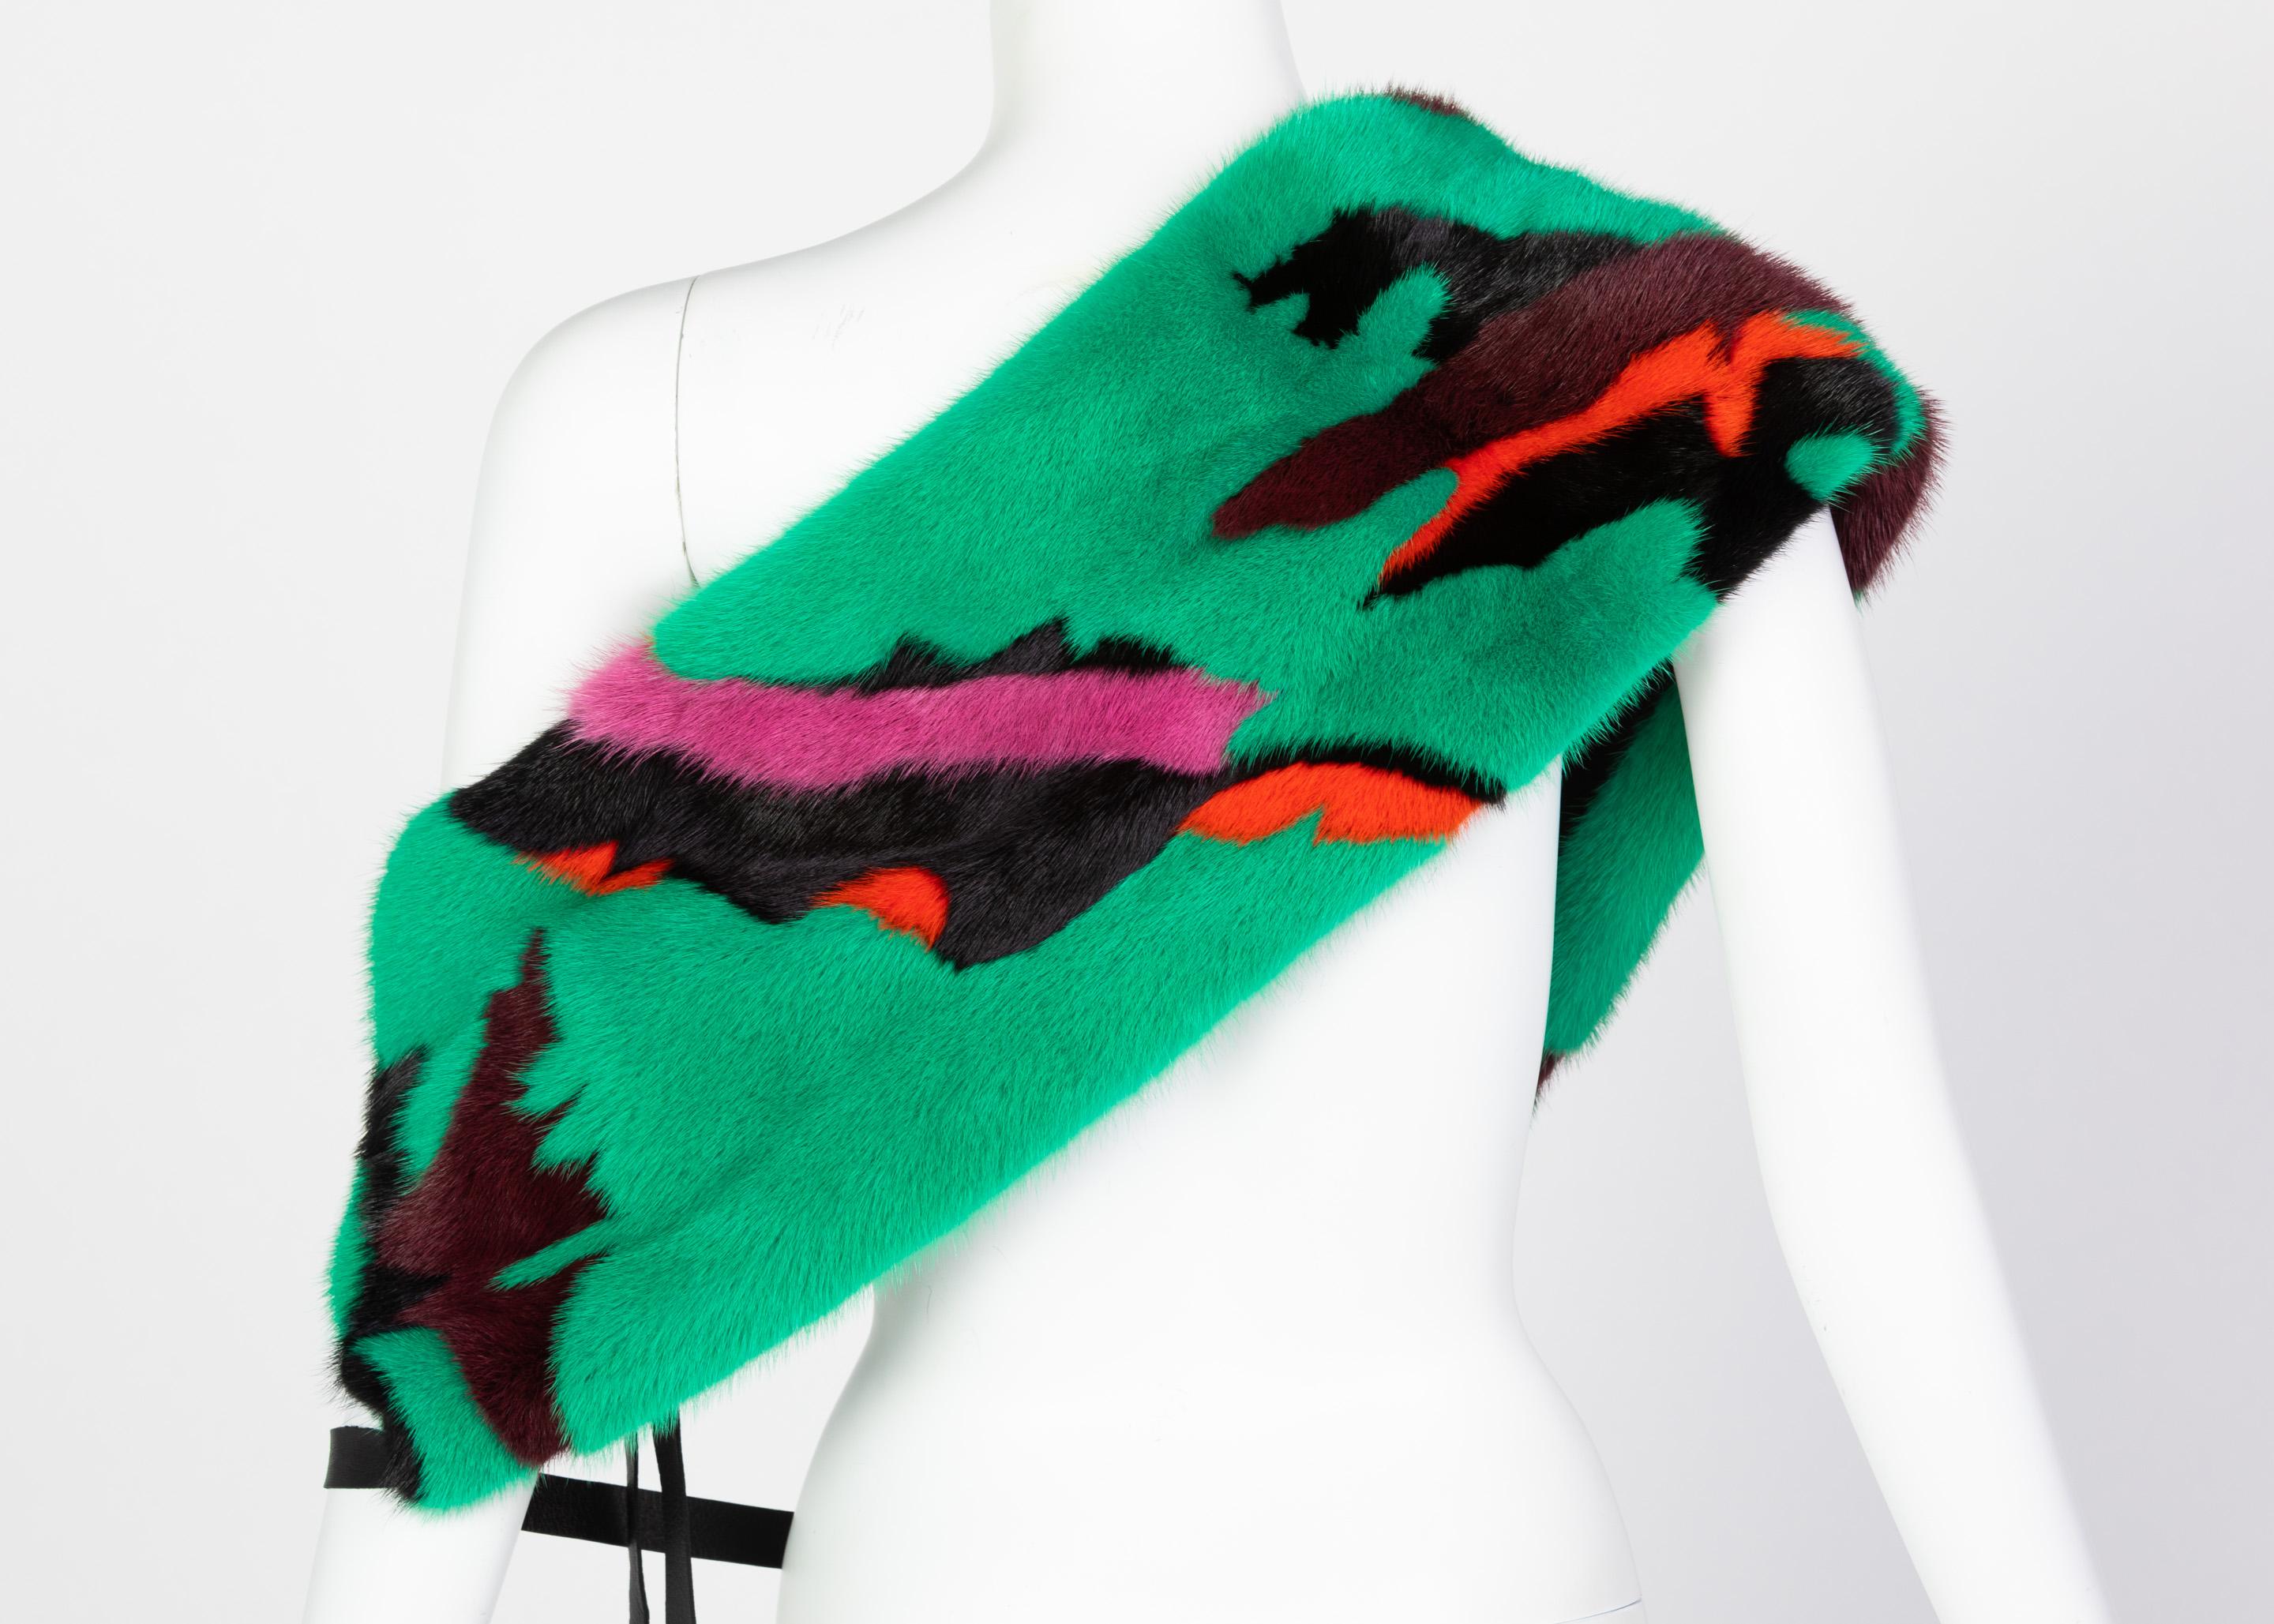 Proenza Schouler Colorful Mink Fur Leather Shrug, 2016 In New Condition For Sale In Boca Raton, FL